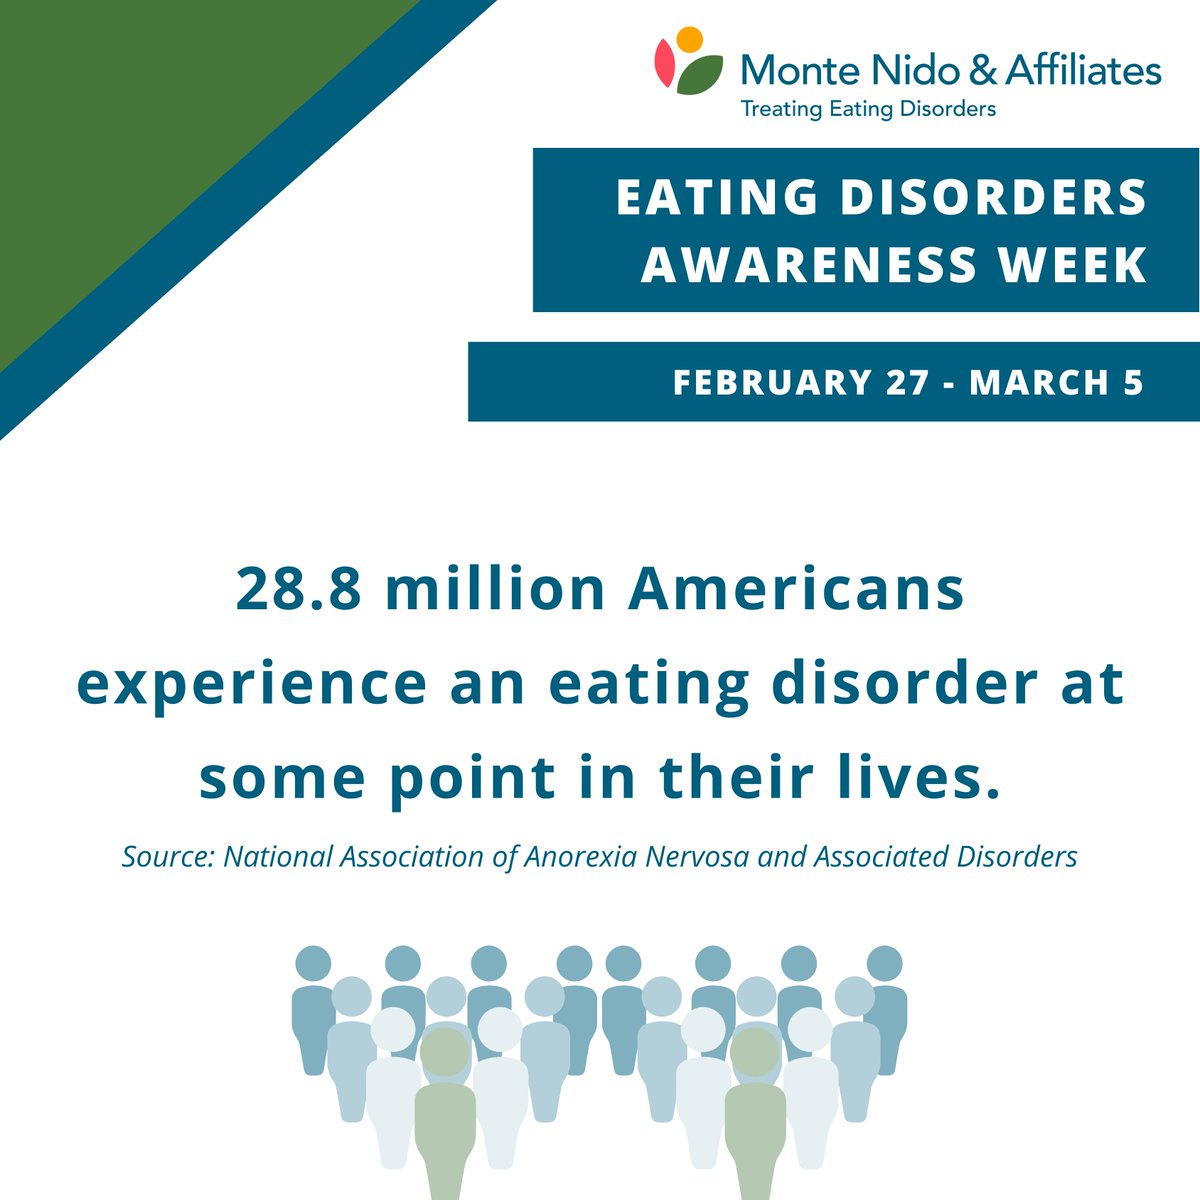 Did you know?

28.8 million Americans experience an eating disorder at some point in their lives. 

Raise awareness this week and every week - #ItsTimeForChange

#eatingdisorderawarenessweek #edsupport #edawareness #edrecovery